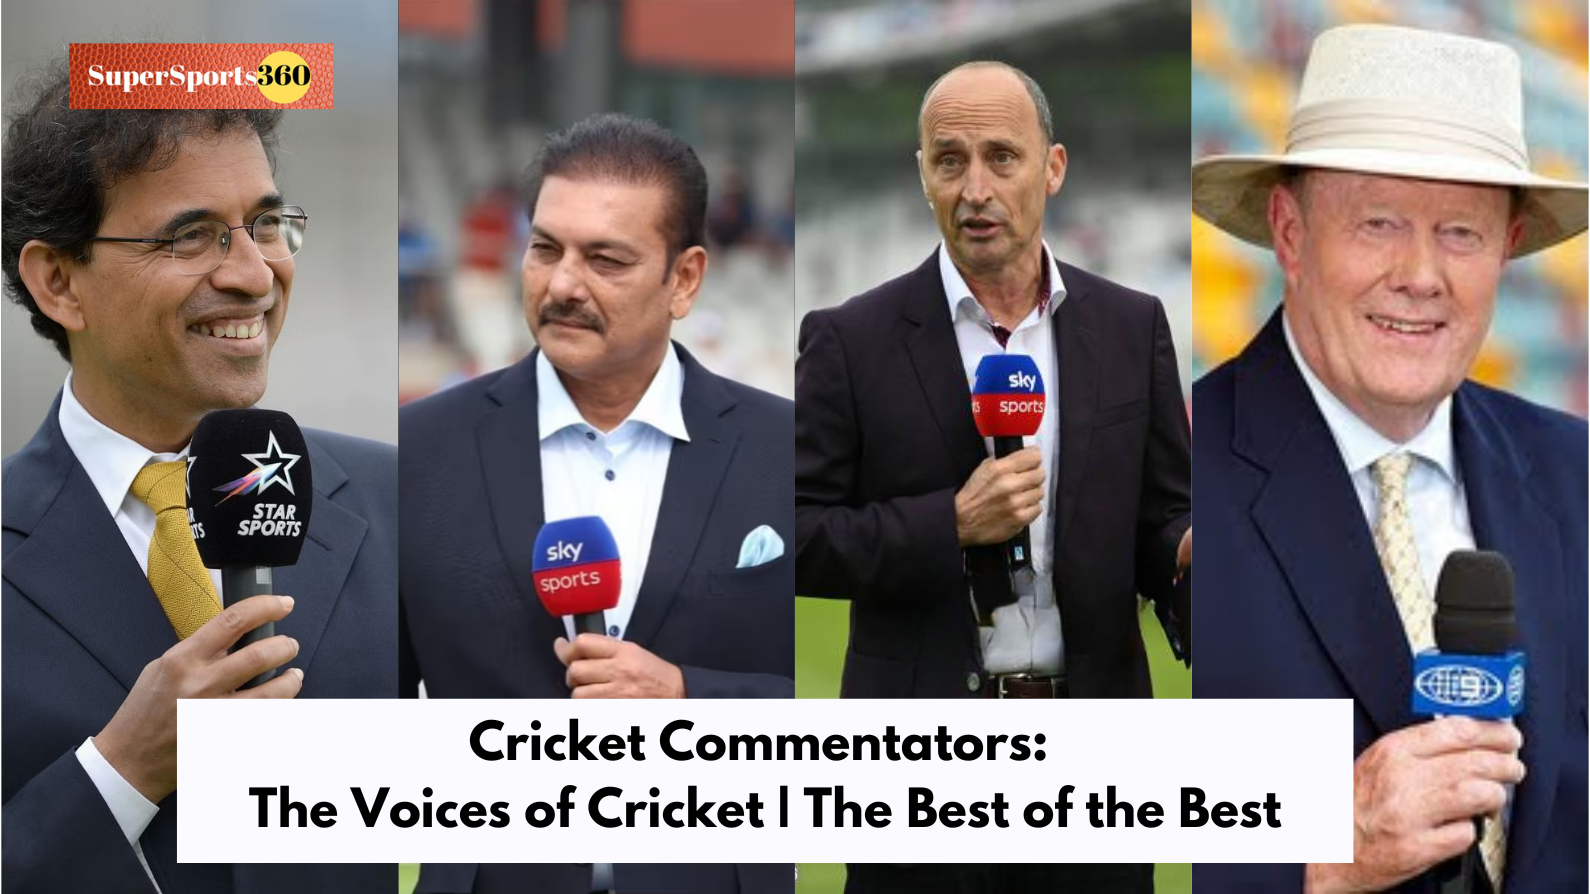 Cricket Commentators: The Voices of Cricket | The Best of the Best